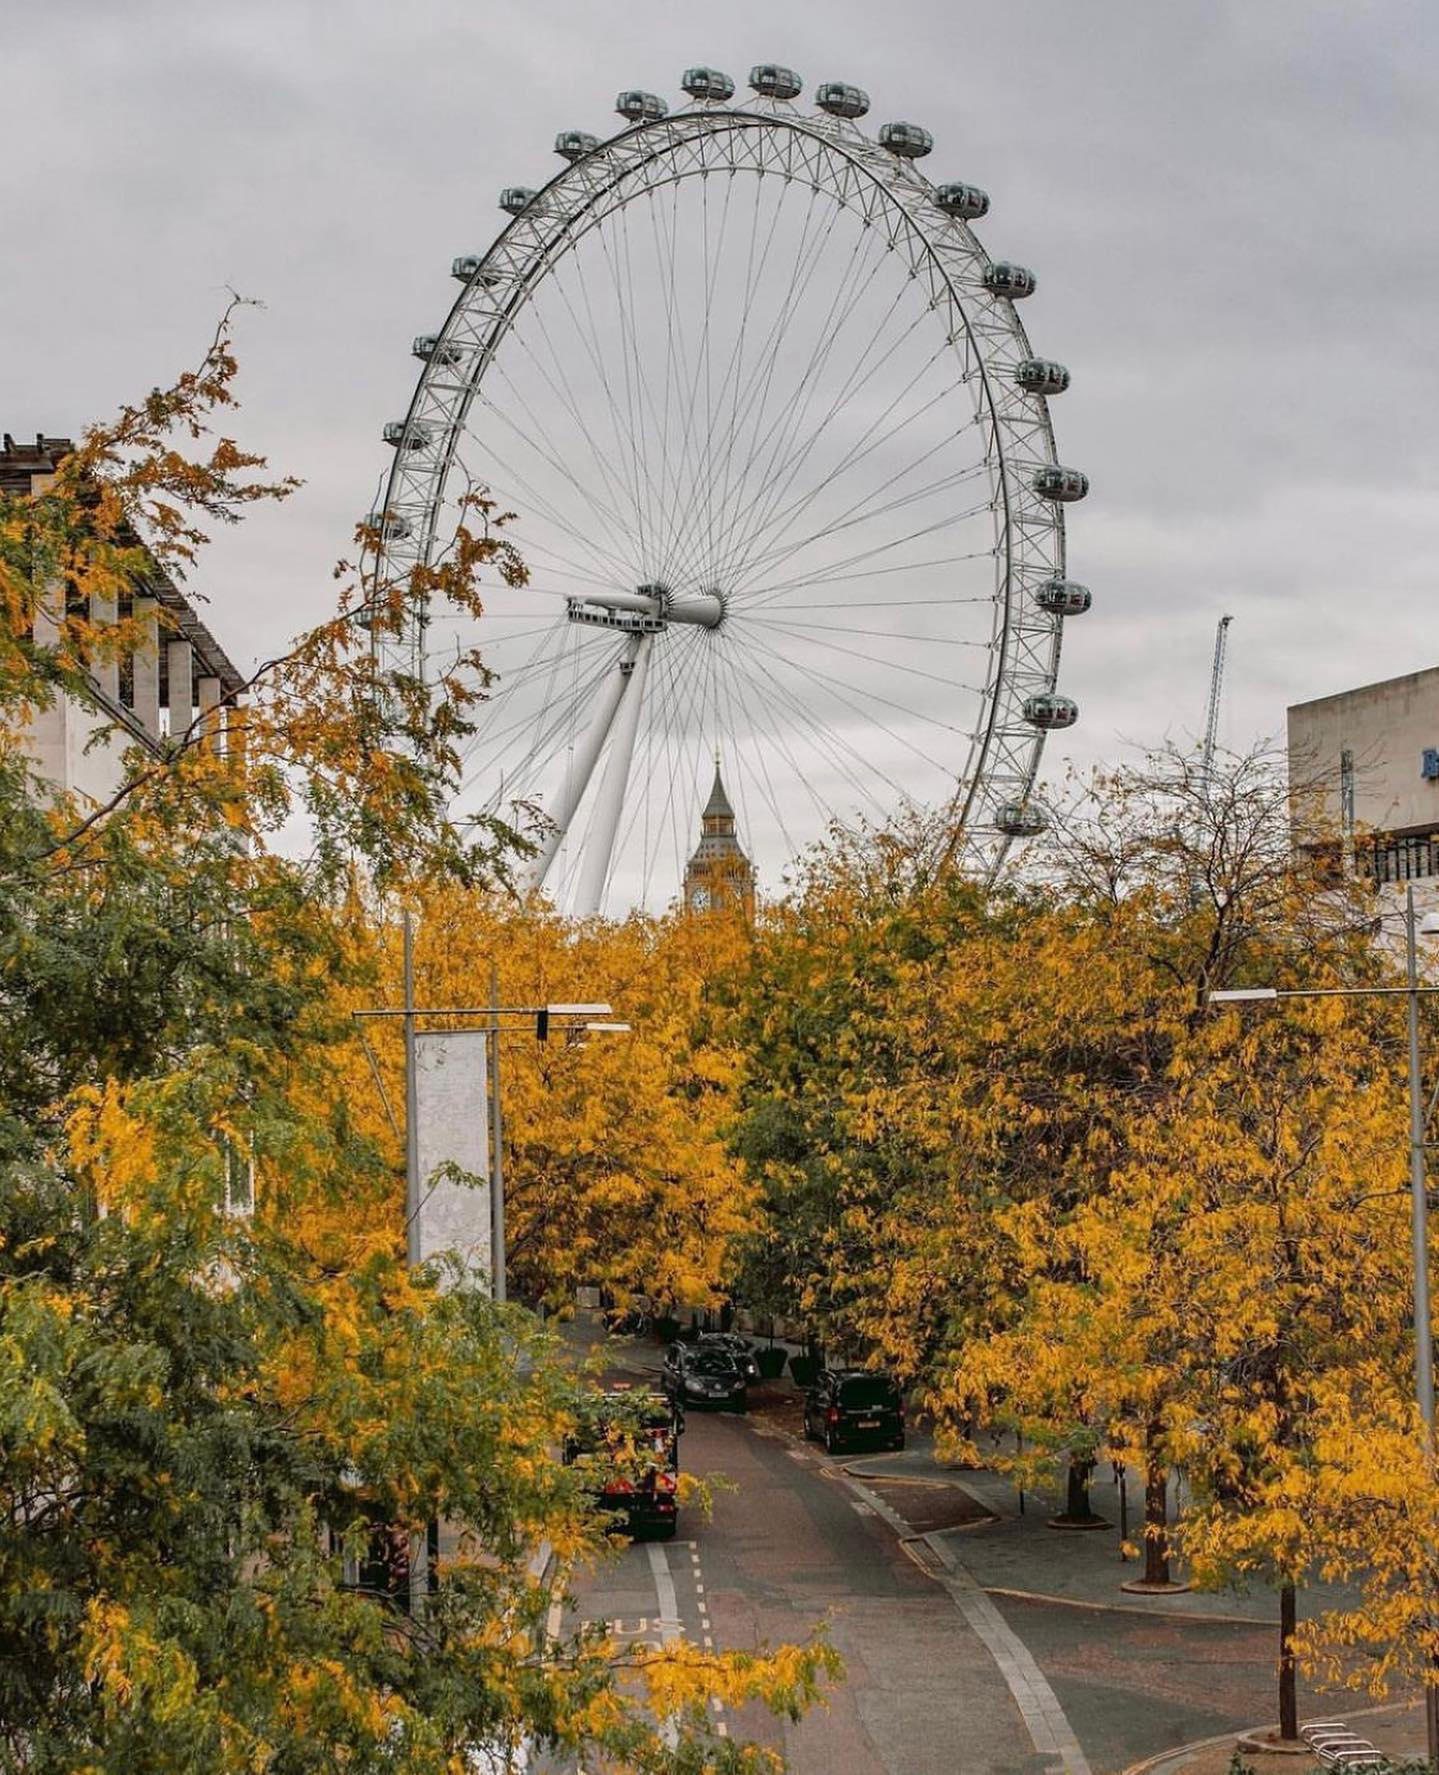 All Things England - Autumn in London by #lundonlens